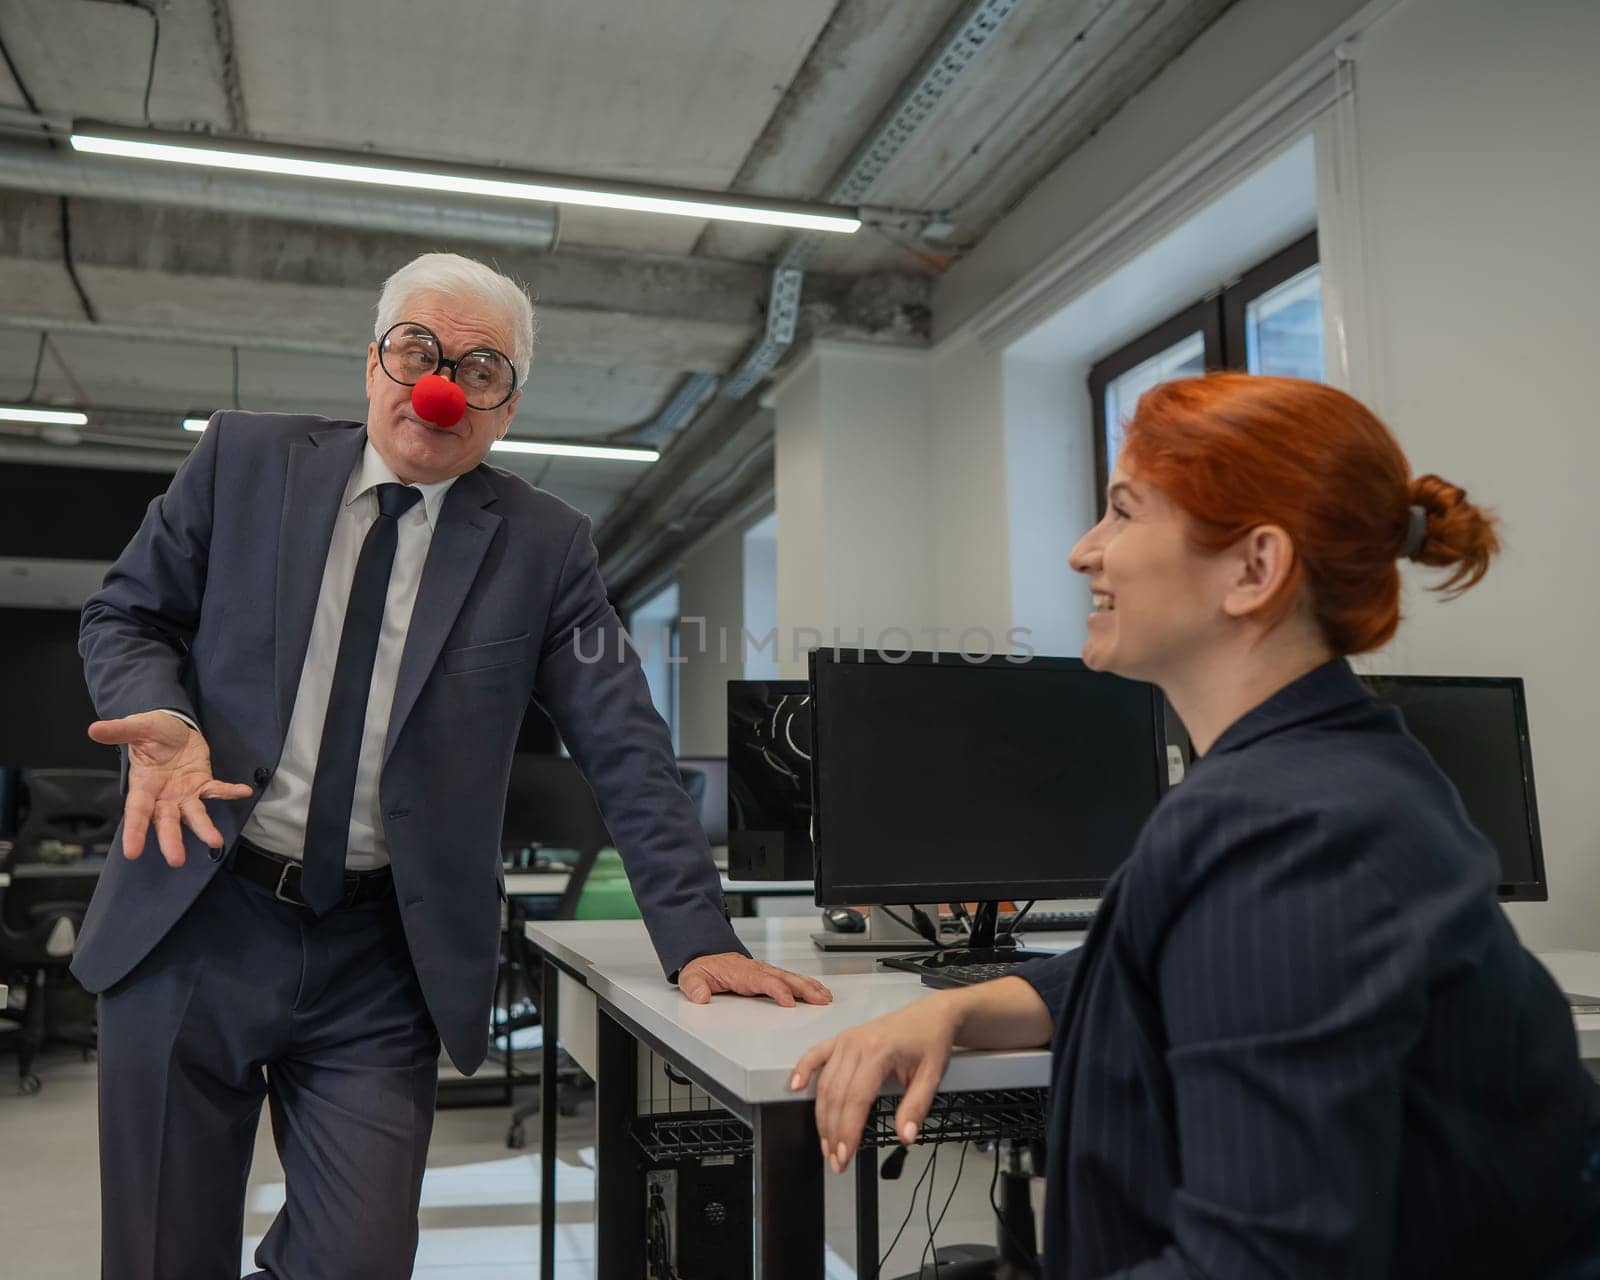 Caucasian woman communicates with an elderly man in a clown costume in the office. by mrwed54